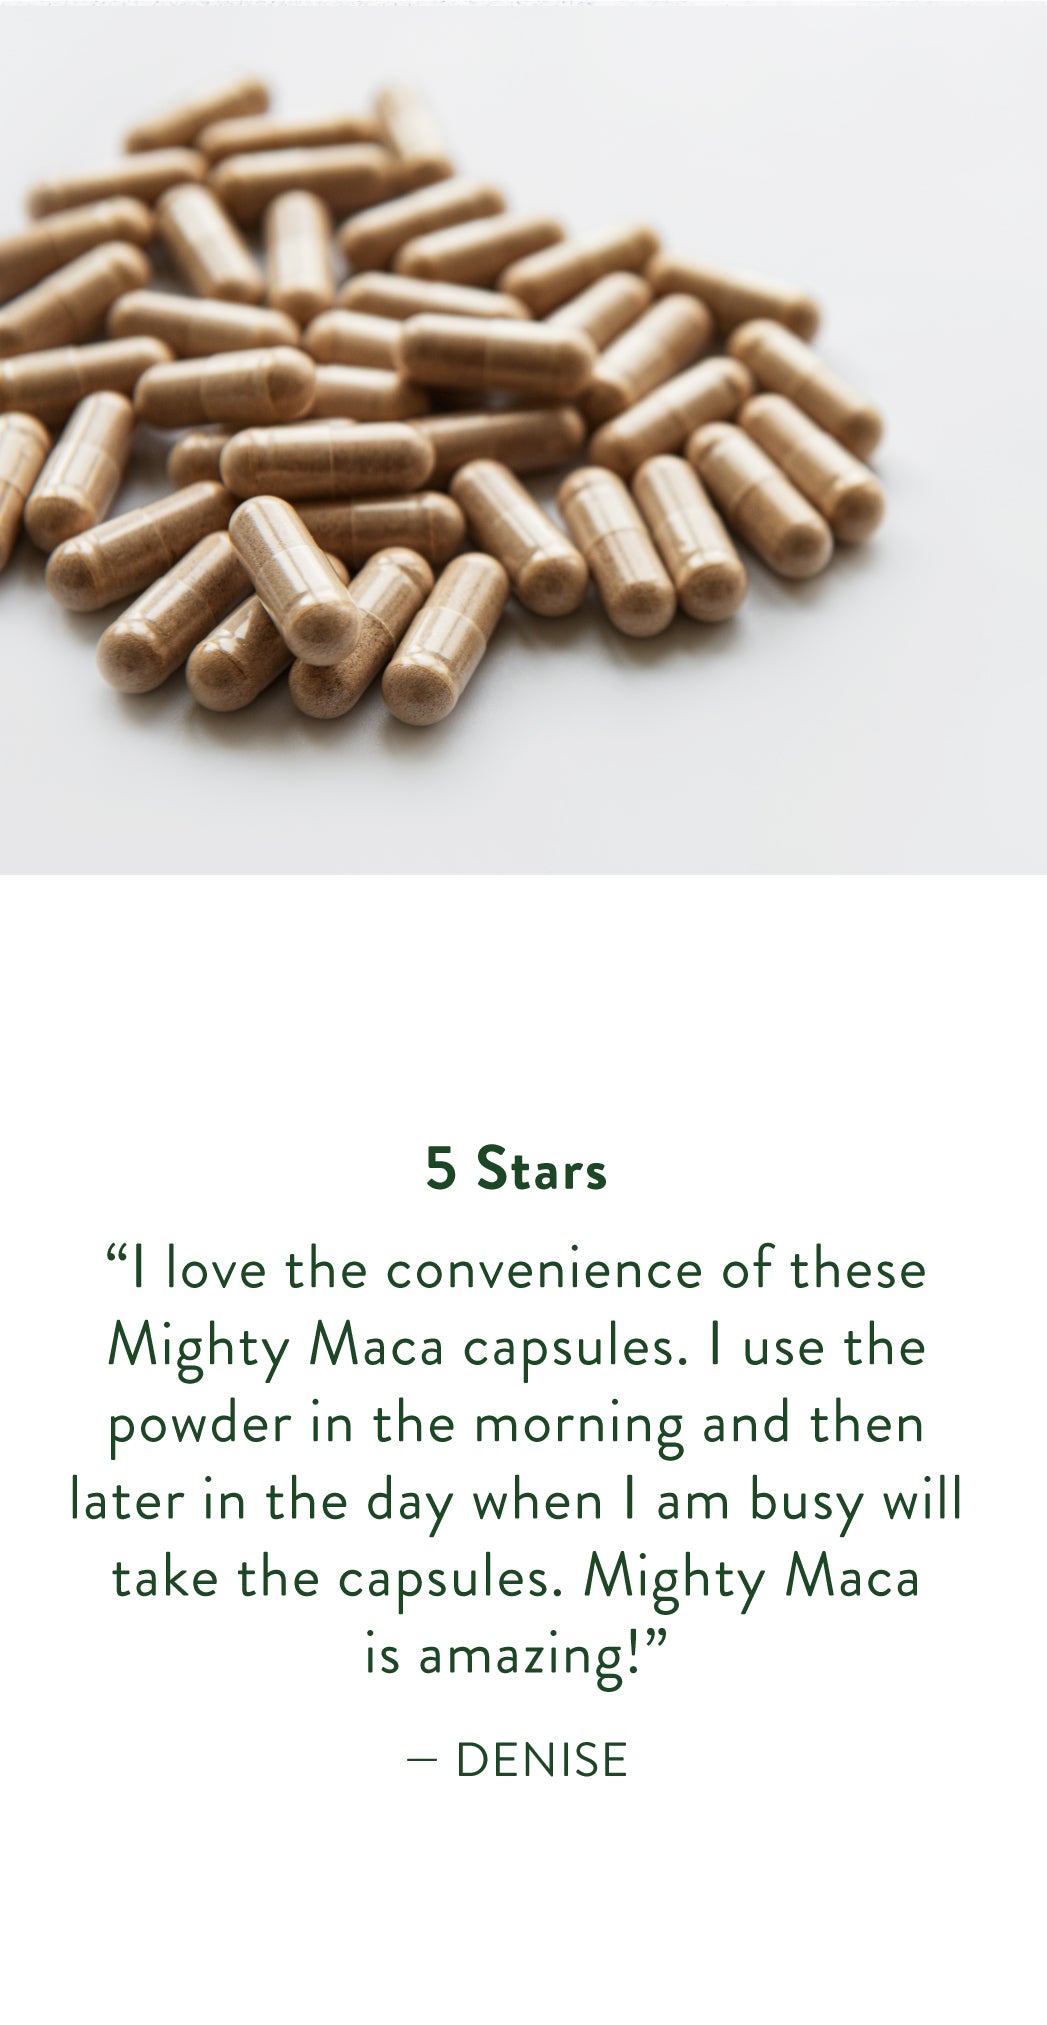 Denise Says: "I love the convenience of these mighty maca capsules. I use the powder in the morning and then later in the day when I am busy will take the capsules. Mighty Maca is amazing!"